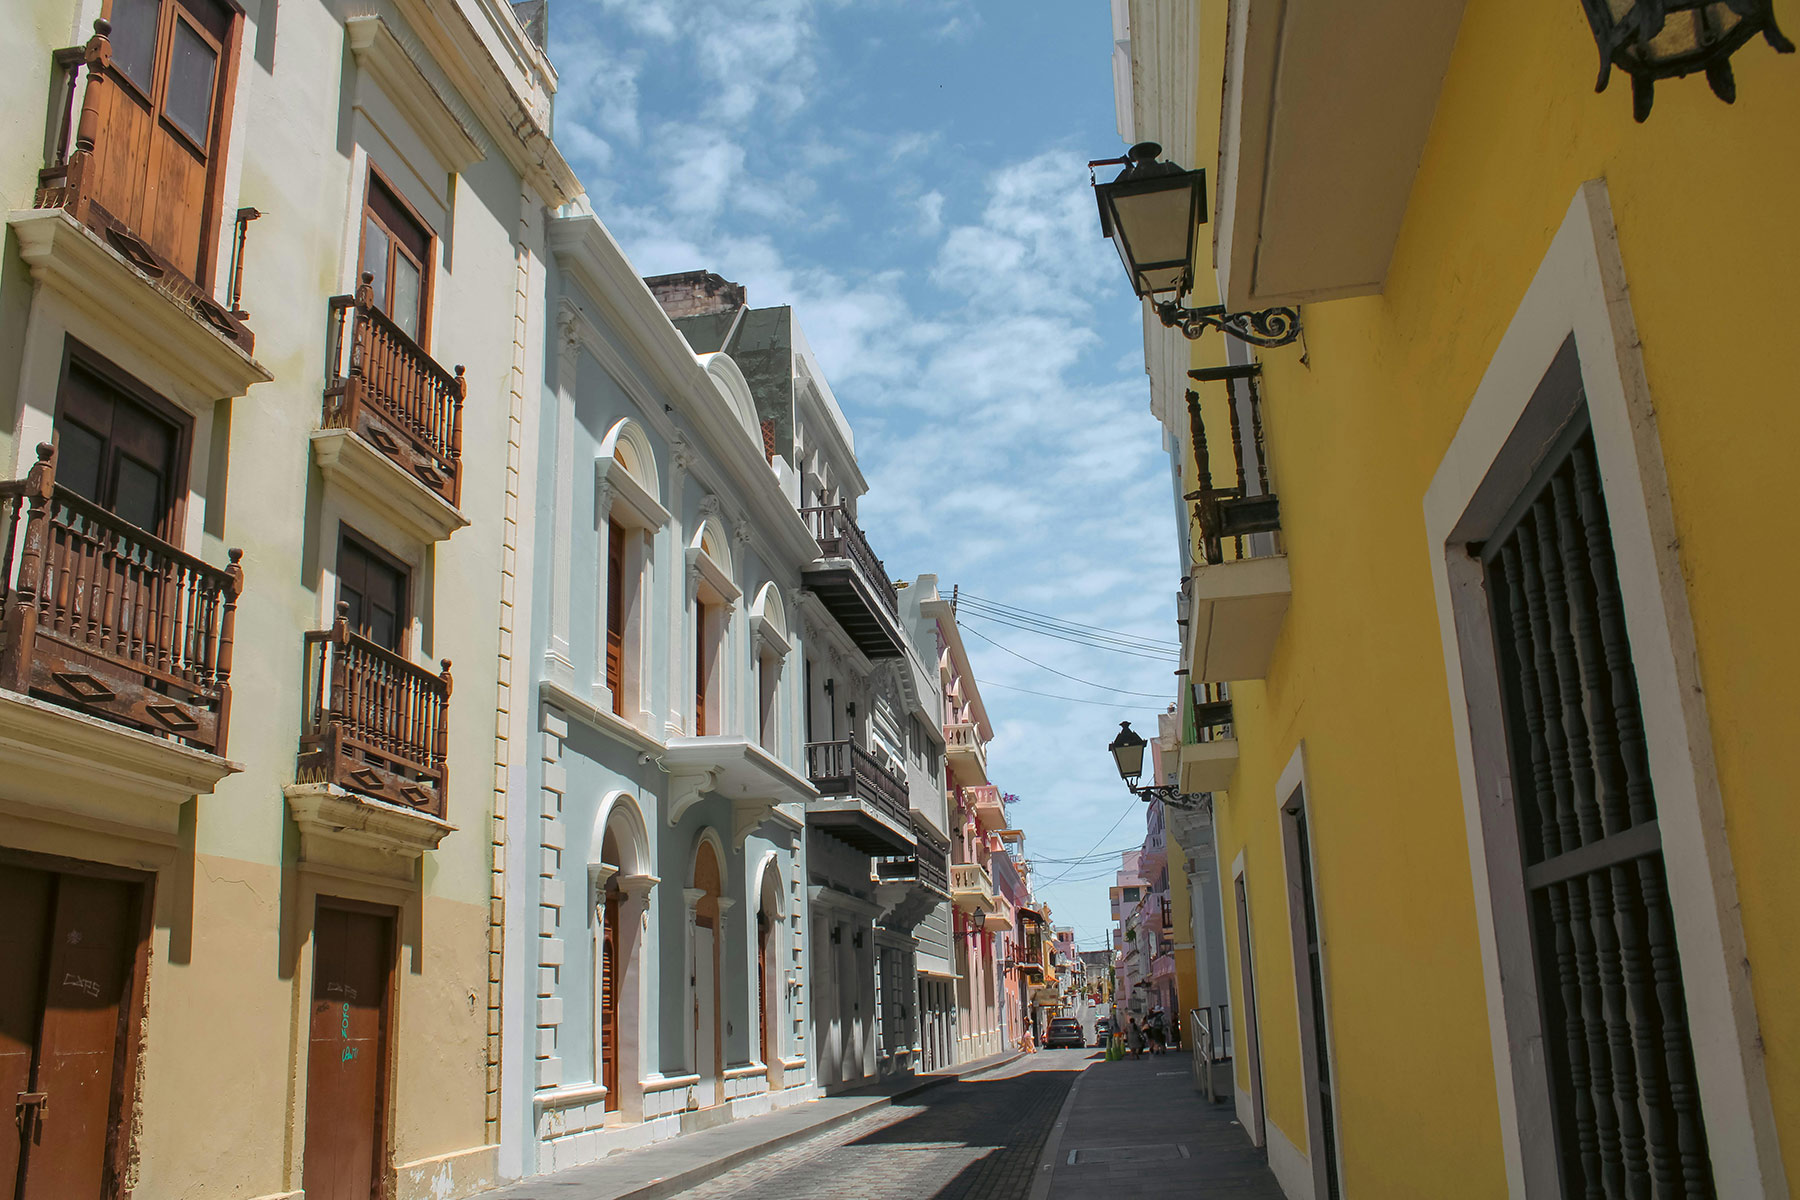 A street in Puerto Rico